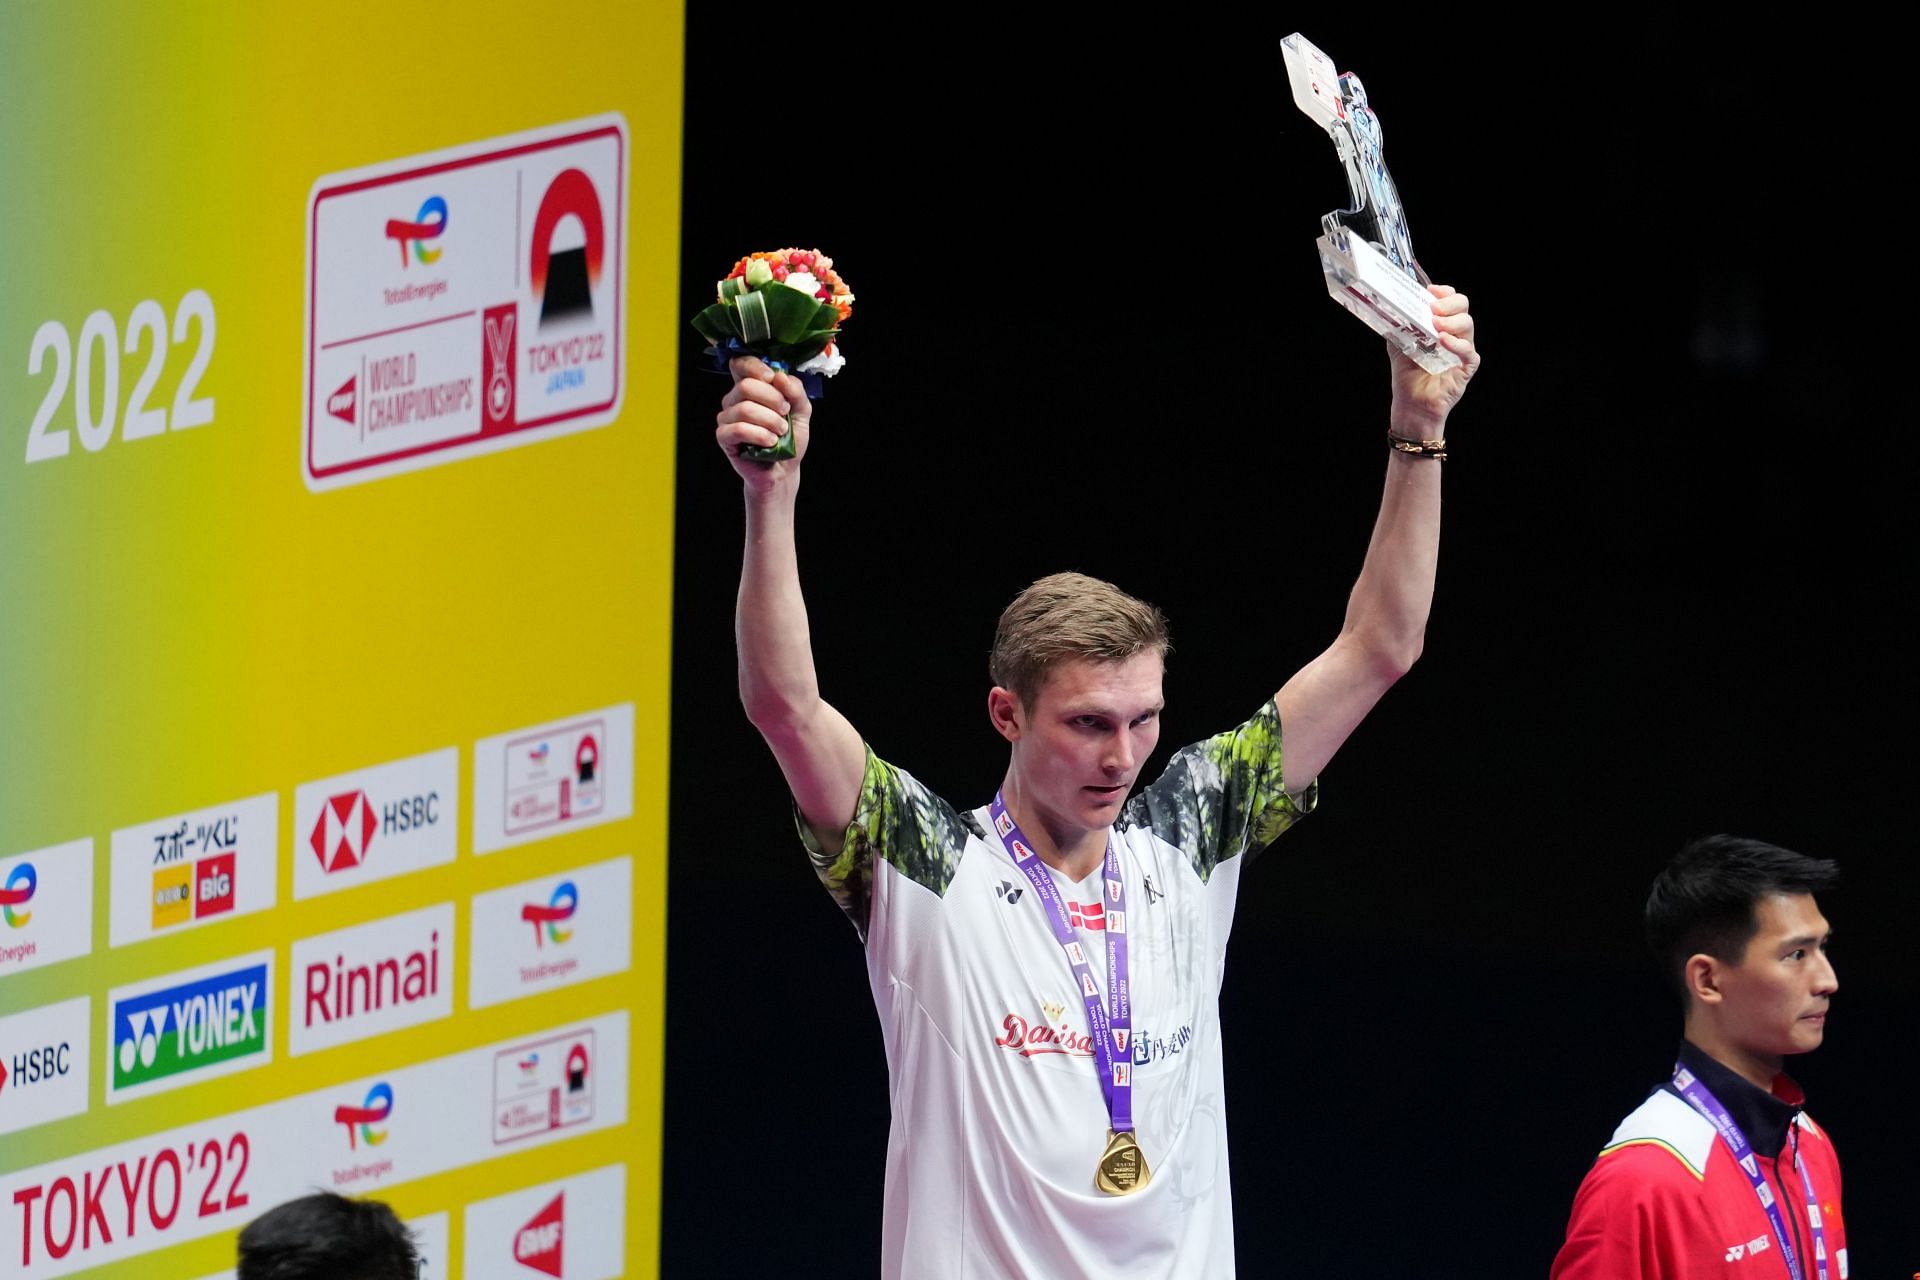 India Open 2023 Kidambi Srikanth vs Viktor Axelsen preview, head-to-head, prediction, where to watch and live streaming details